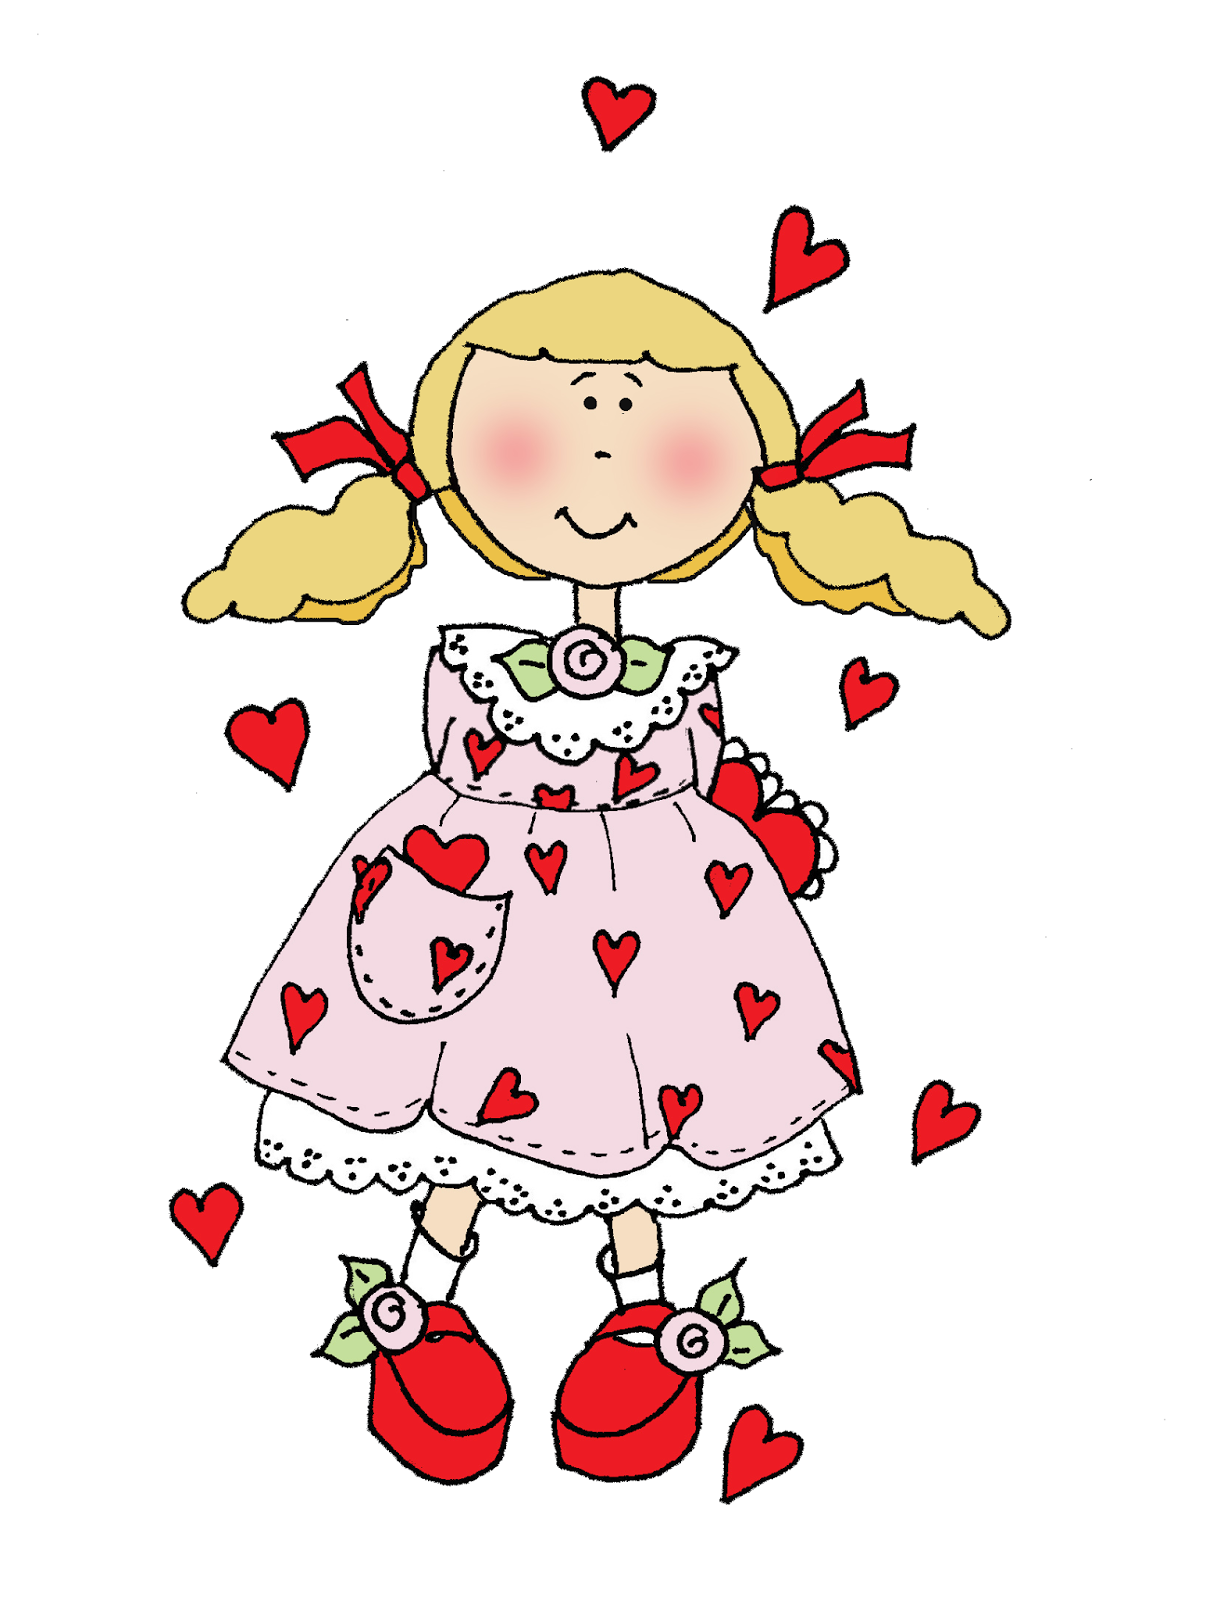 Free Dearie Dolls Digi Stamps: Valentine and Hearts